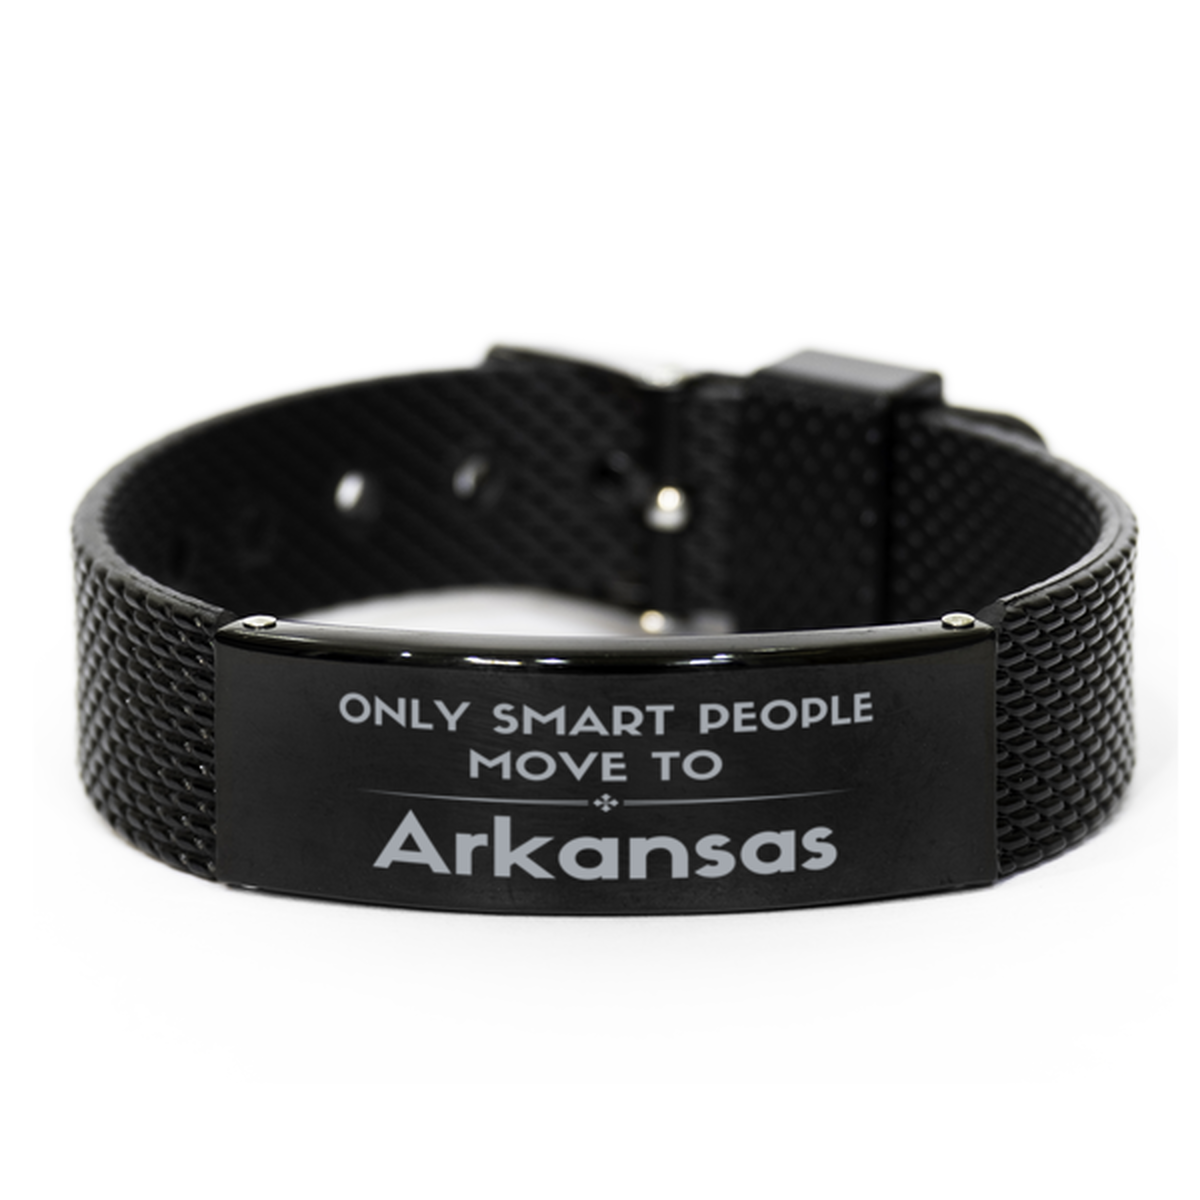 Only smart people move to Arkansas Black Shark Mesh Bracelet, Gag Gifts For Arkansas, Move to Arkansas Gifts for Friends Coworker Funny Saying Quote